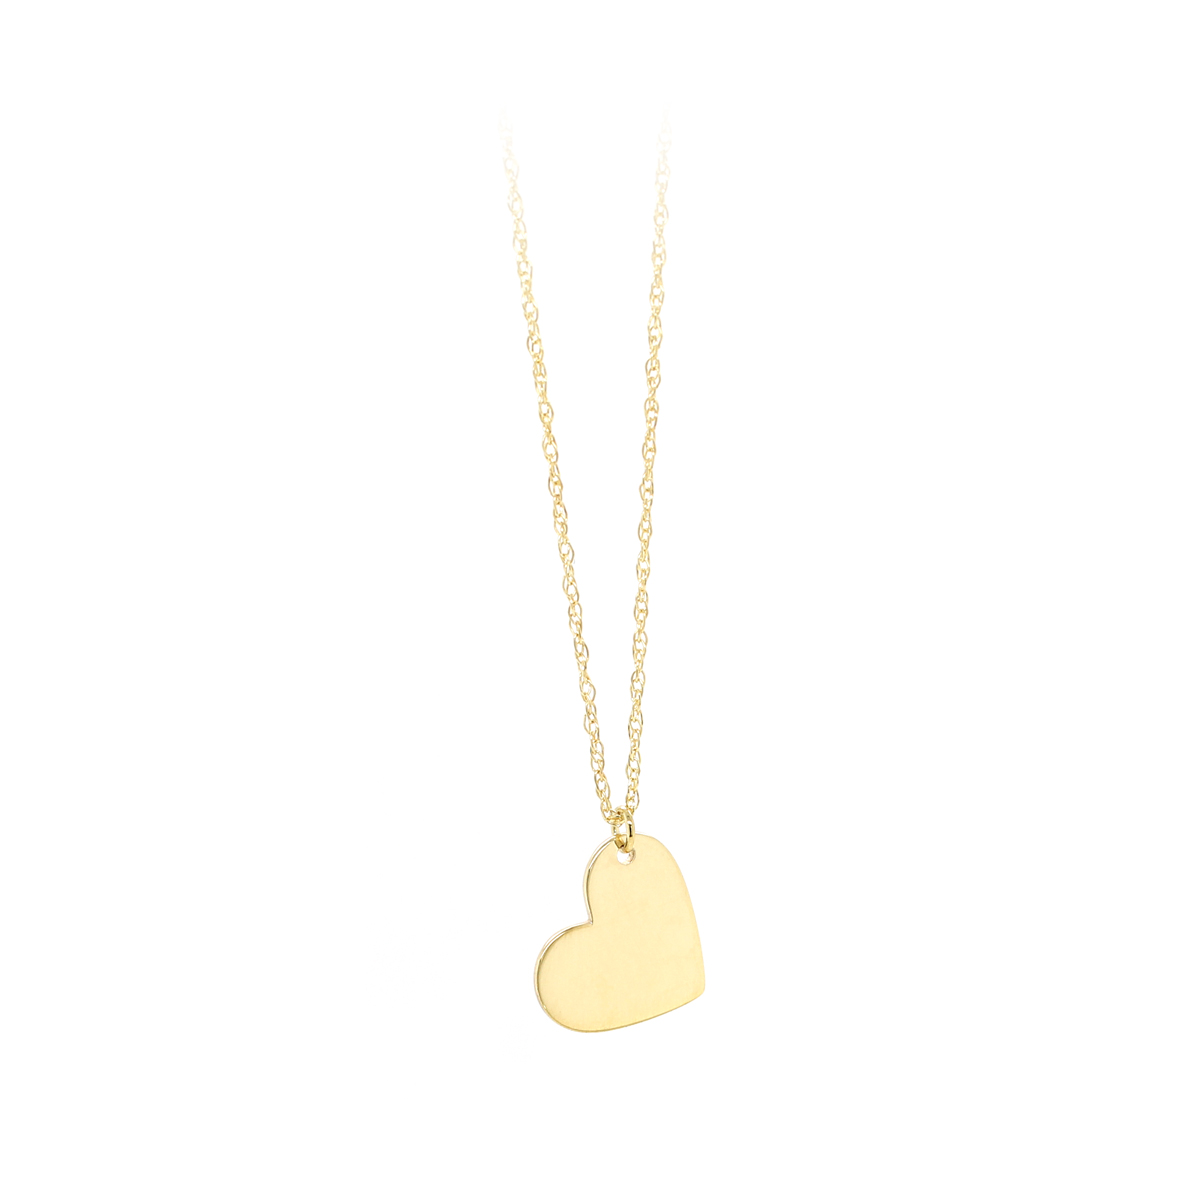 14 Karat Yellow Gold Slanted Heart Pendant Necklace On An 18 Inch Rope Chain With A Lobster Clasp.